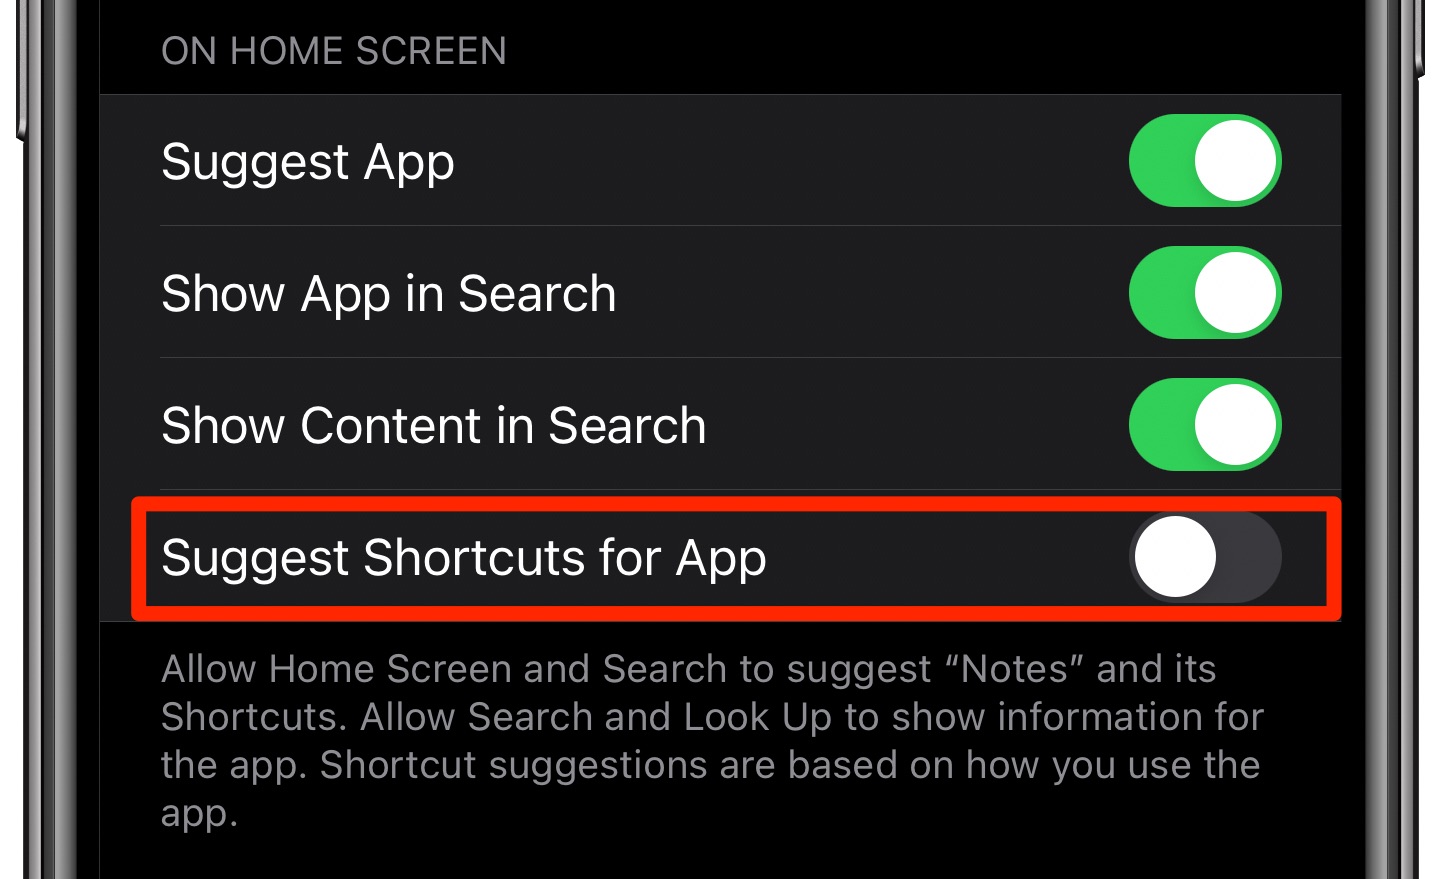 Removing Home screen suggestions for Notes entirely